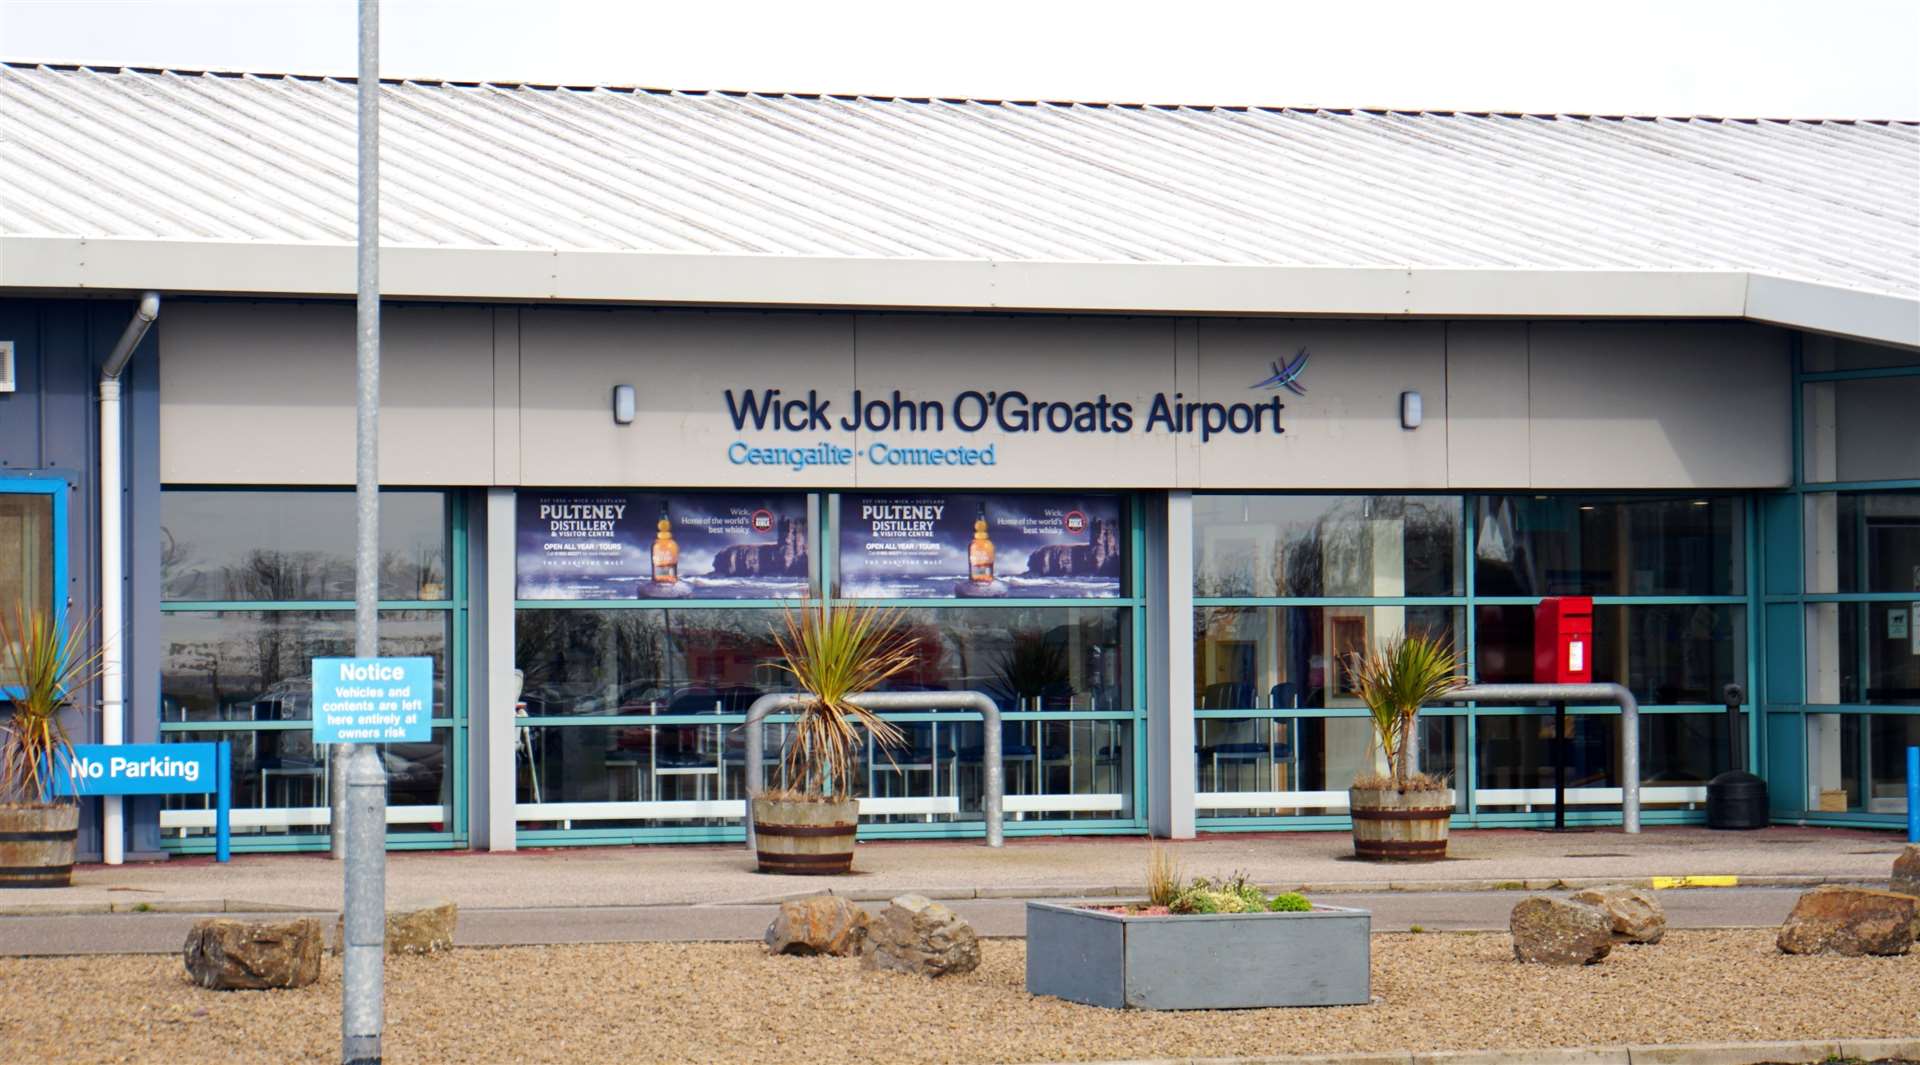 Gail Ross is worried that passenger numbers at Wick John O’Groats Airport could fall to unsustainable levels.